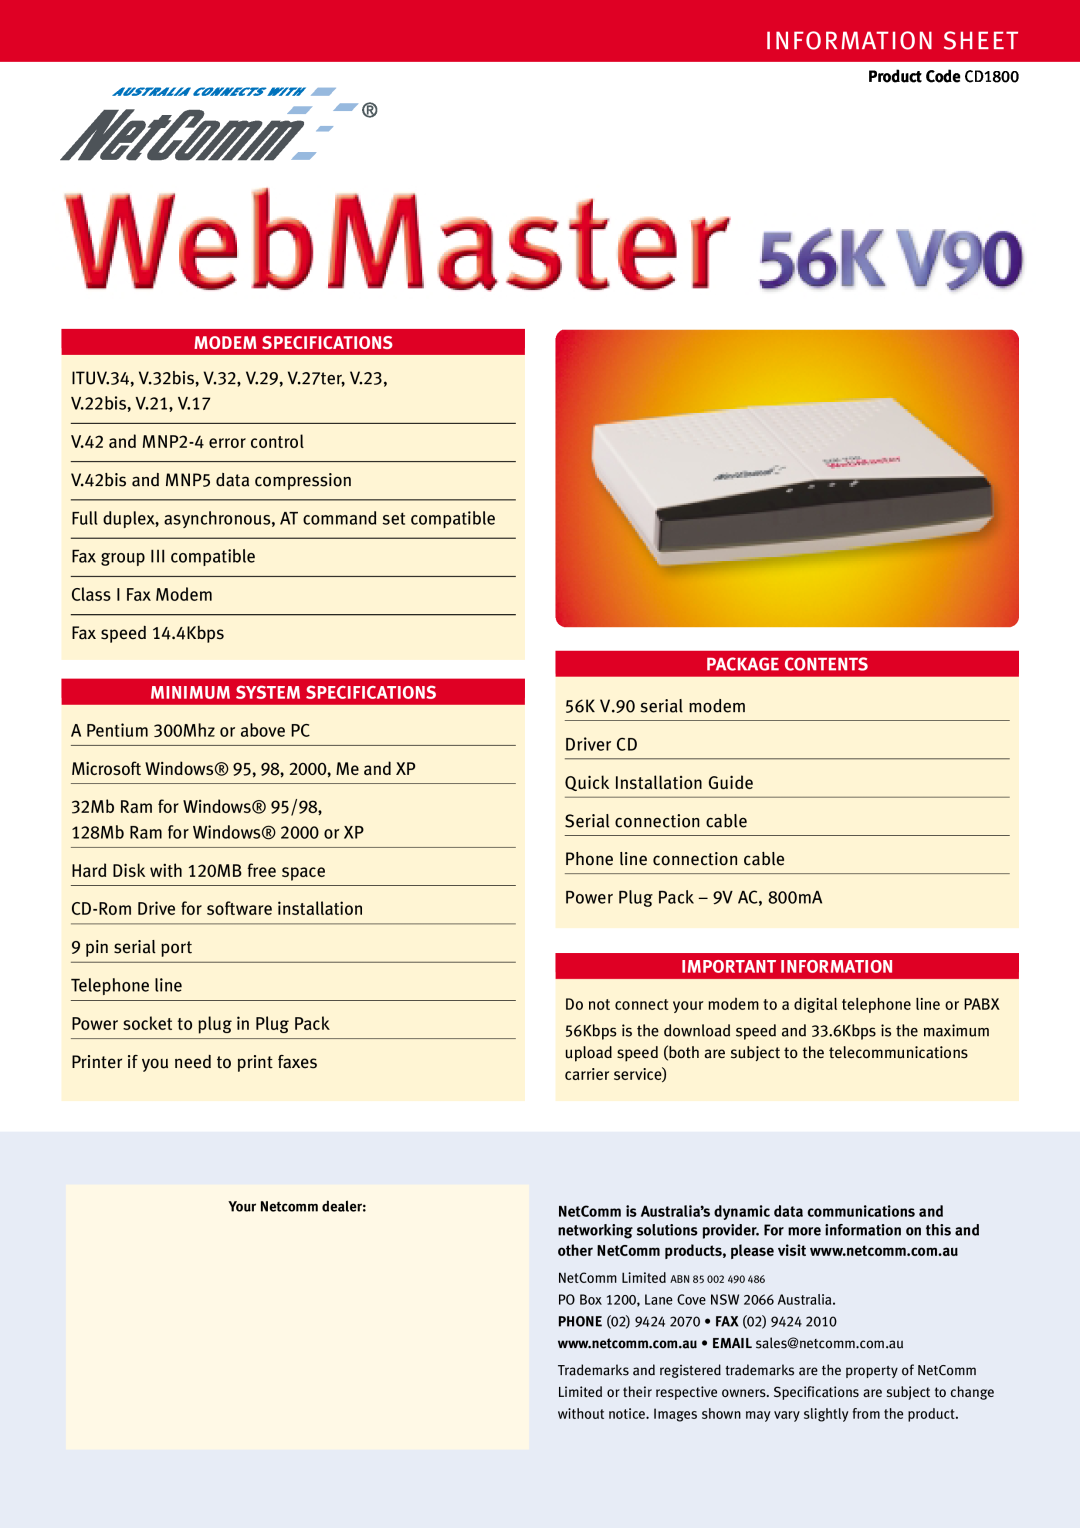 NetComm 56K V90 manual Information Sheet, Modem Specifications, Minimum System Specifications, Package Contents 